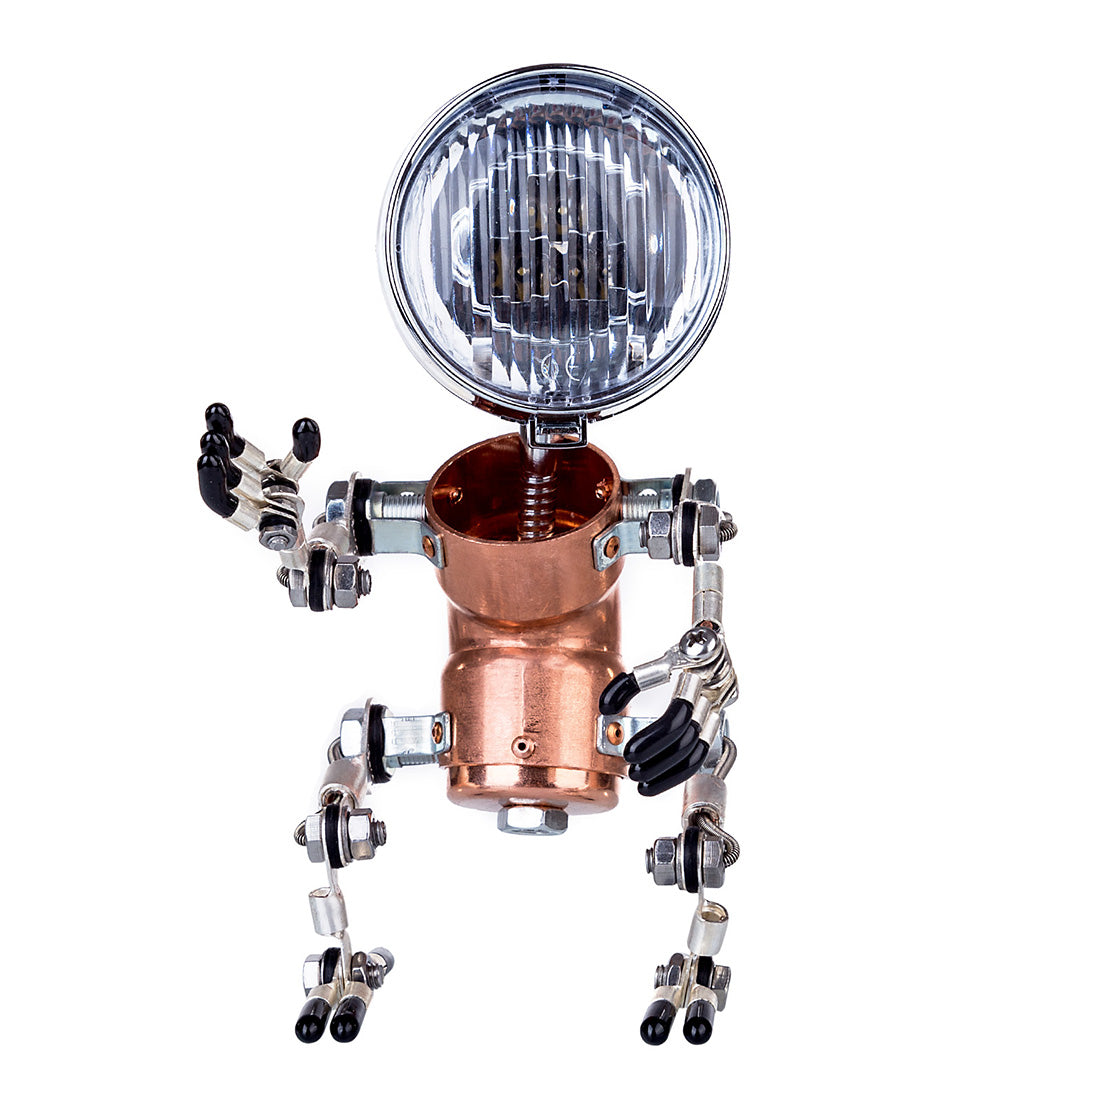 Industrial Style Table Lamp Man Figure 3D Steampunk Handmade Metal Models with Light